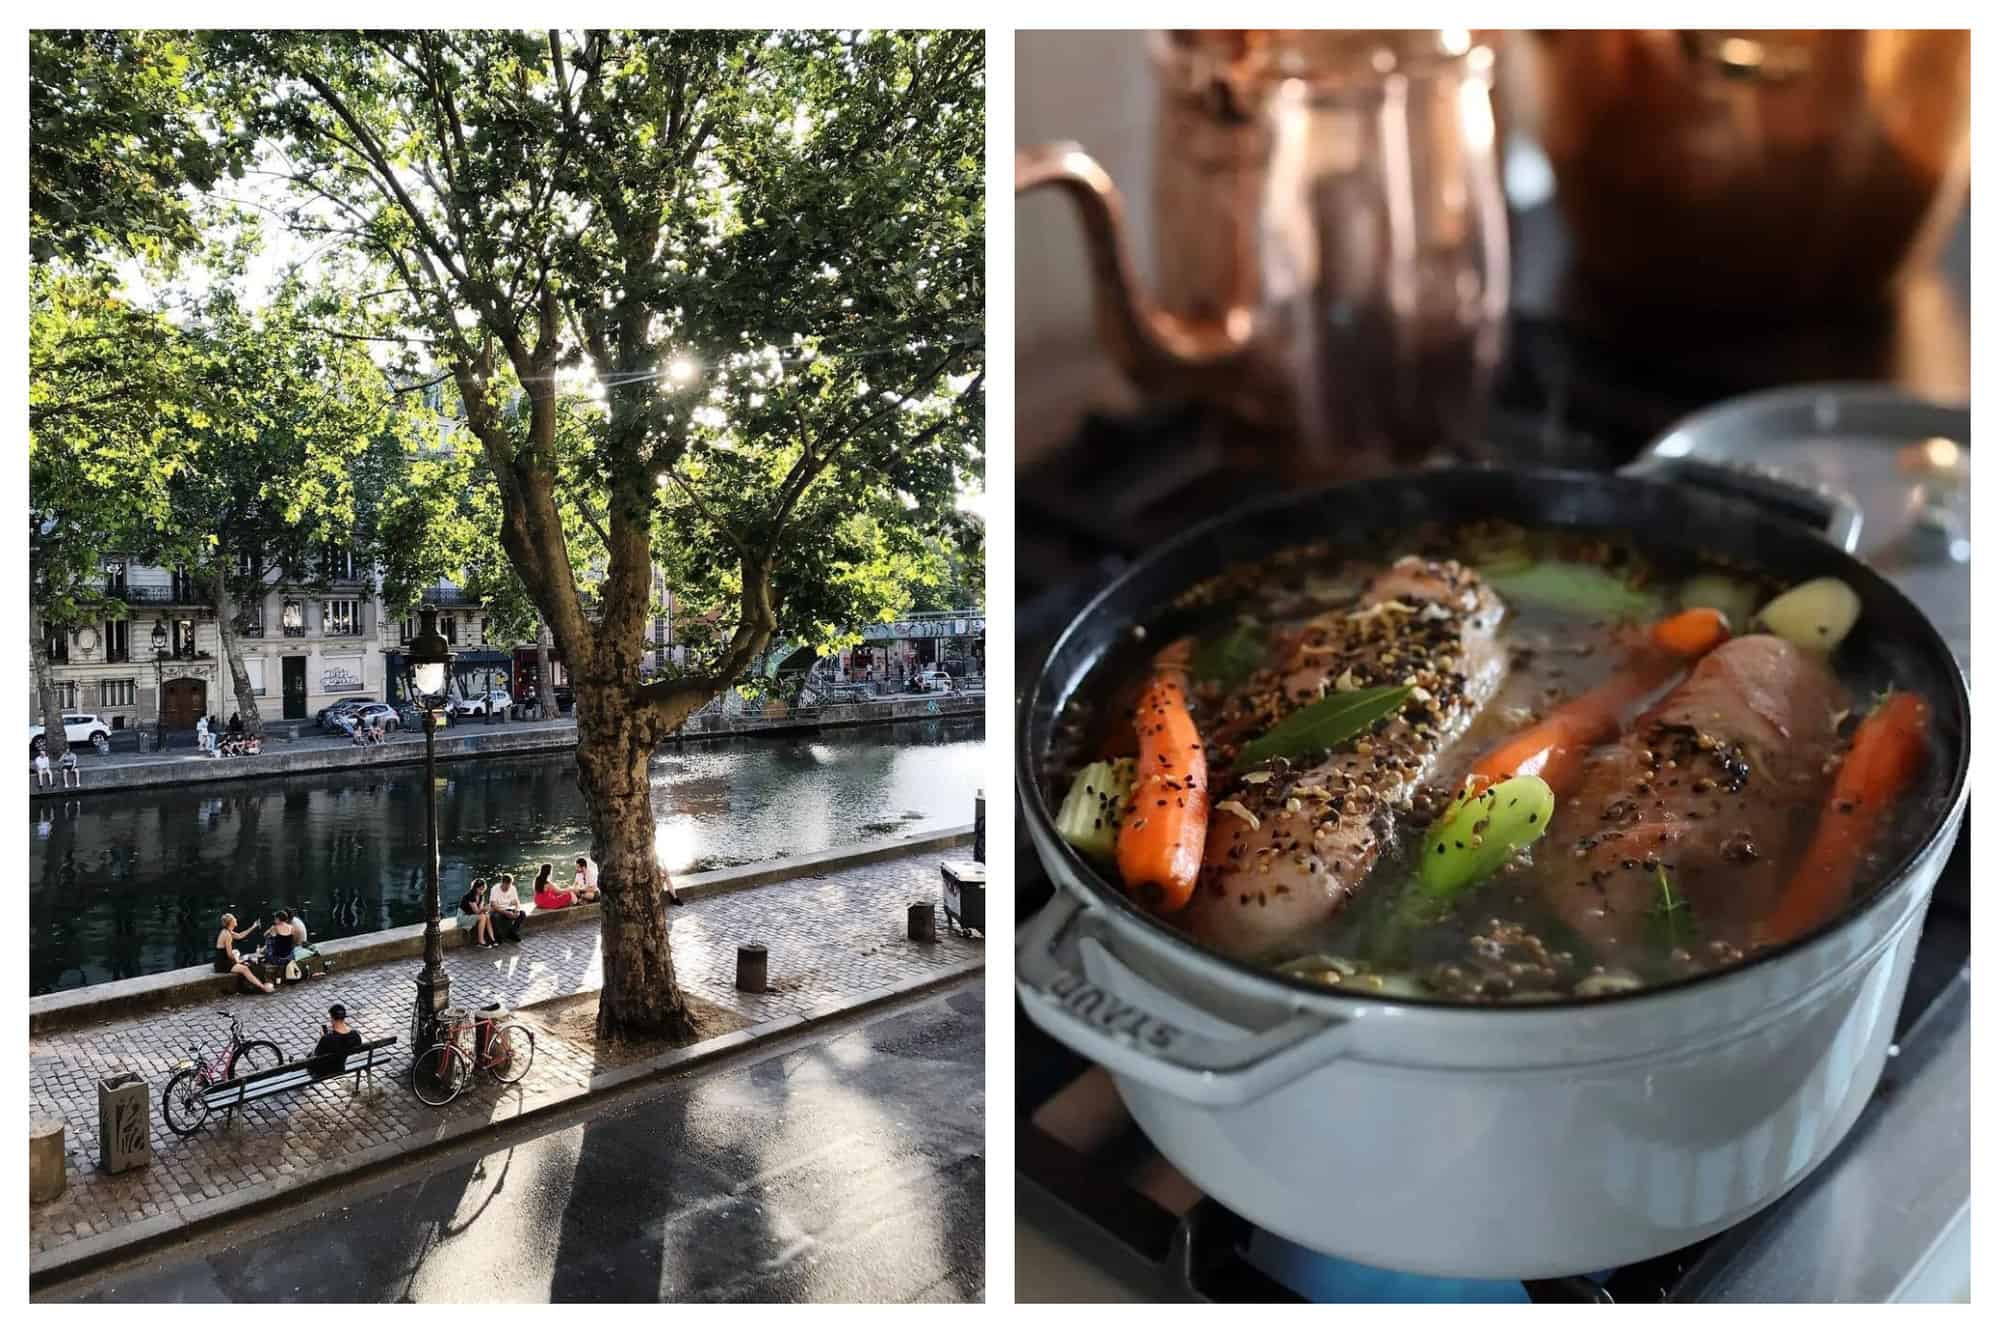 Left-Parisians walk and cycle along a canal. Right- Jarret de porc is shown in a white Staub pan. 